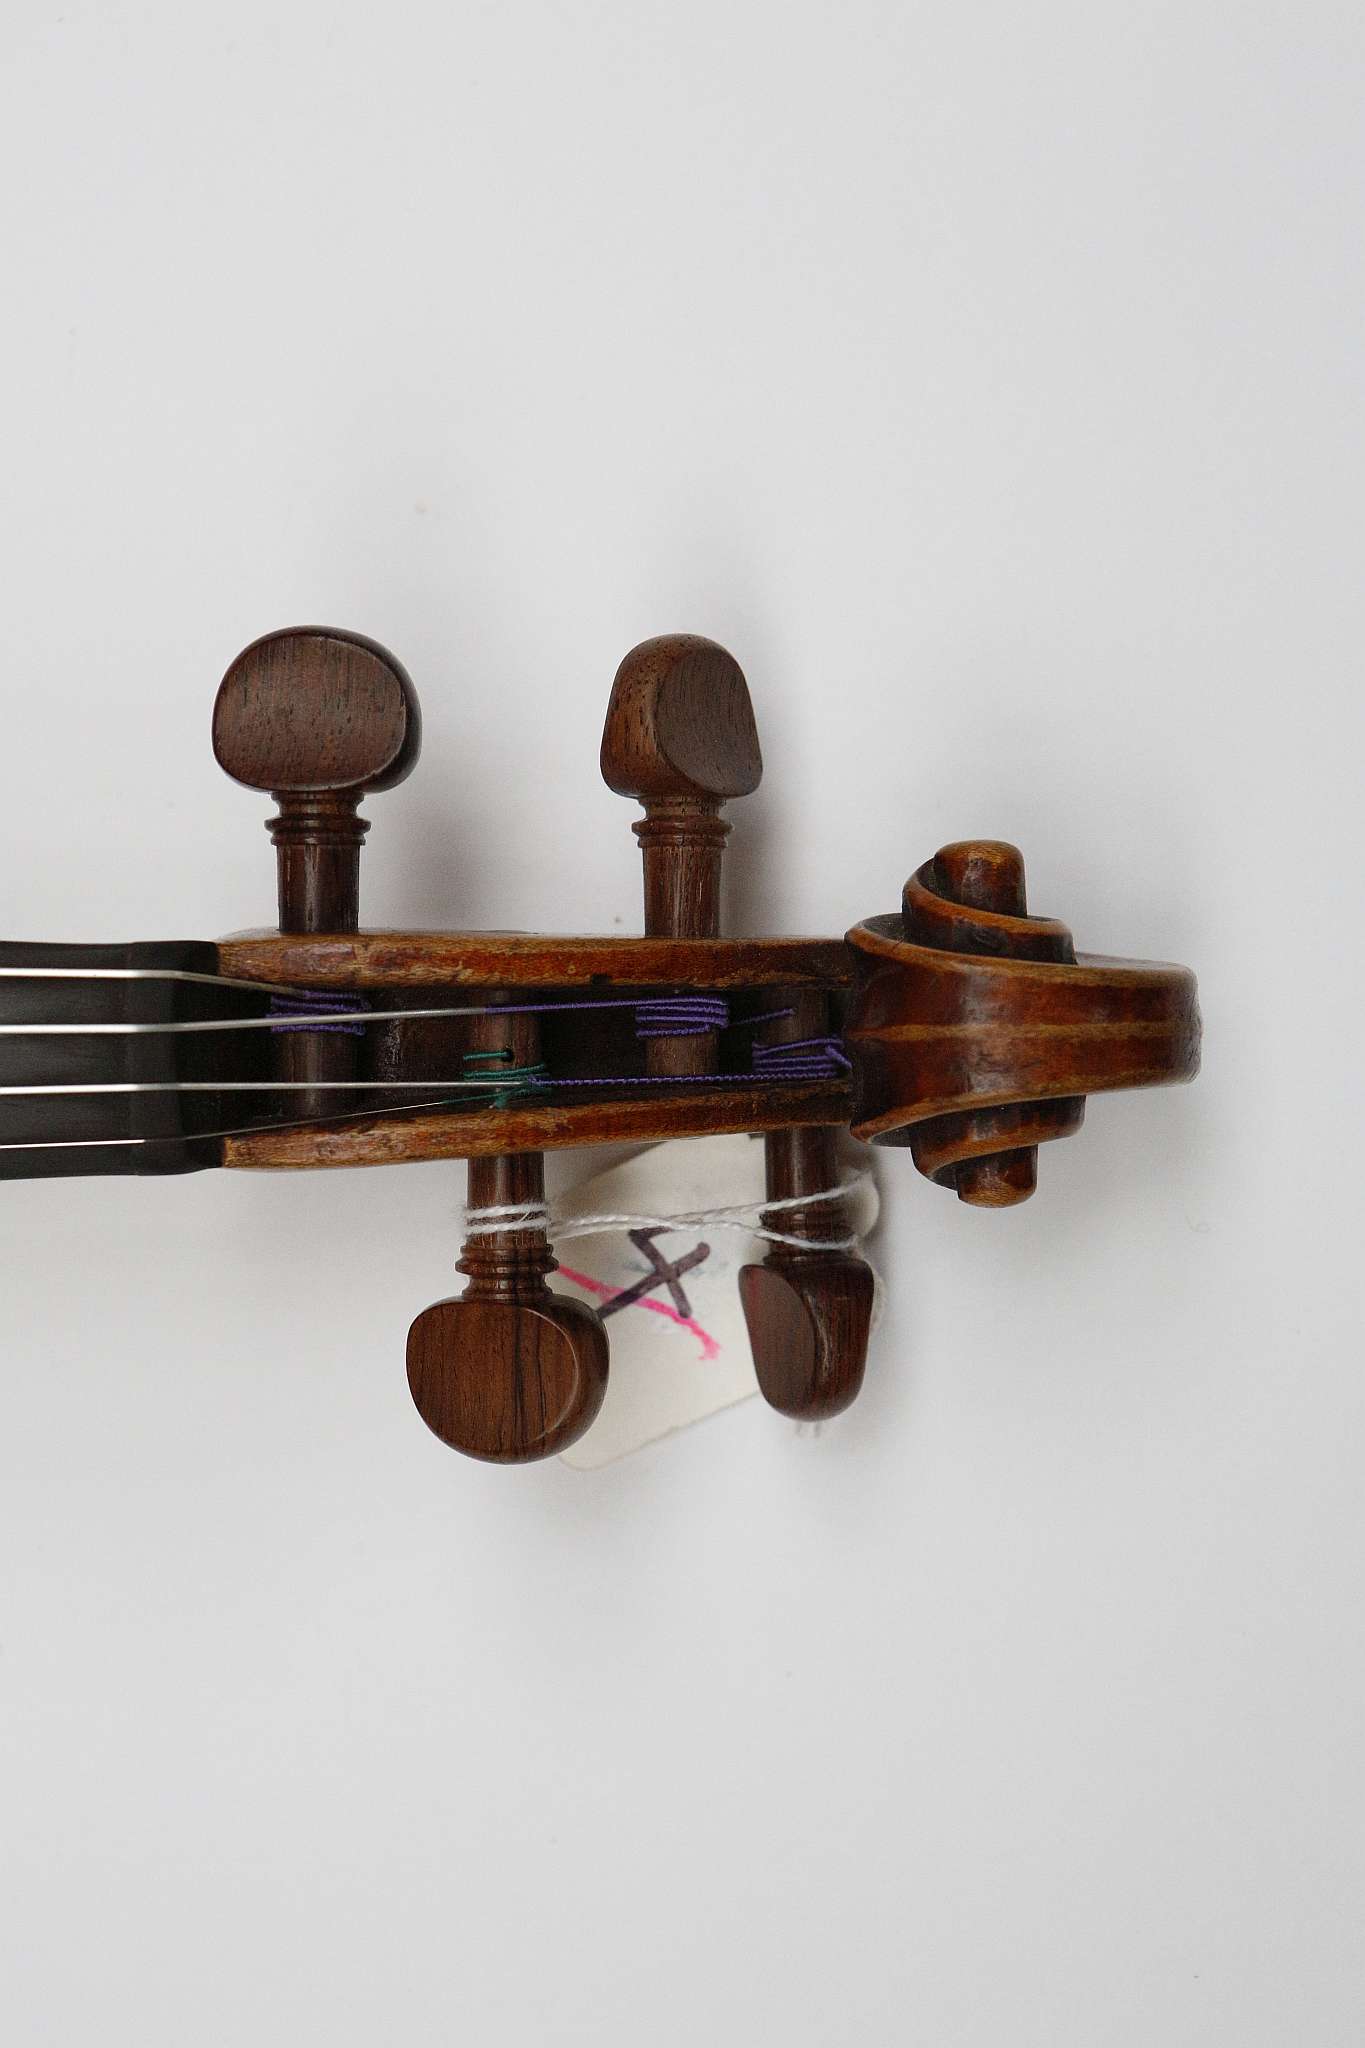 A German violin c.1910, (Karl ad Fritsche, Zitau), with E string, fine tuner on ebony tail piece and - Image 3 of 6